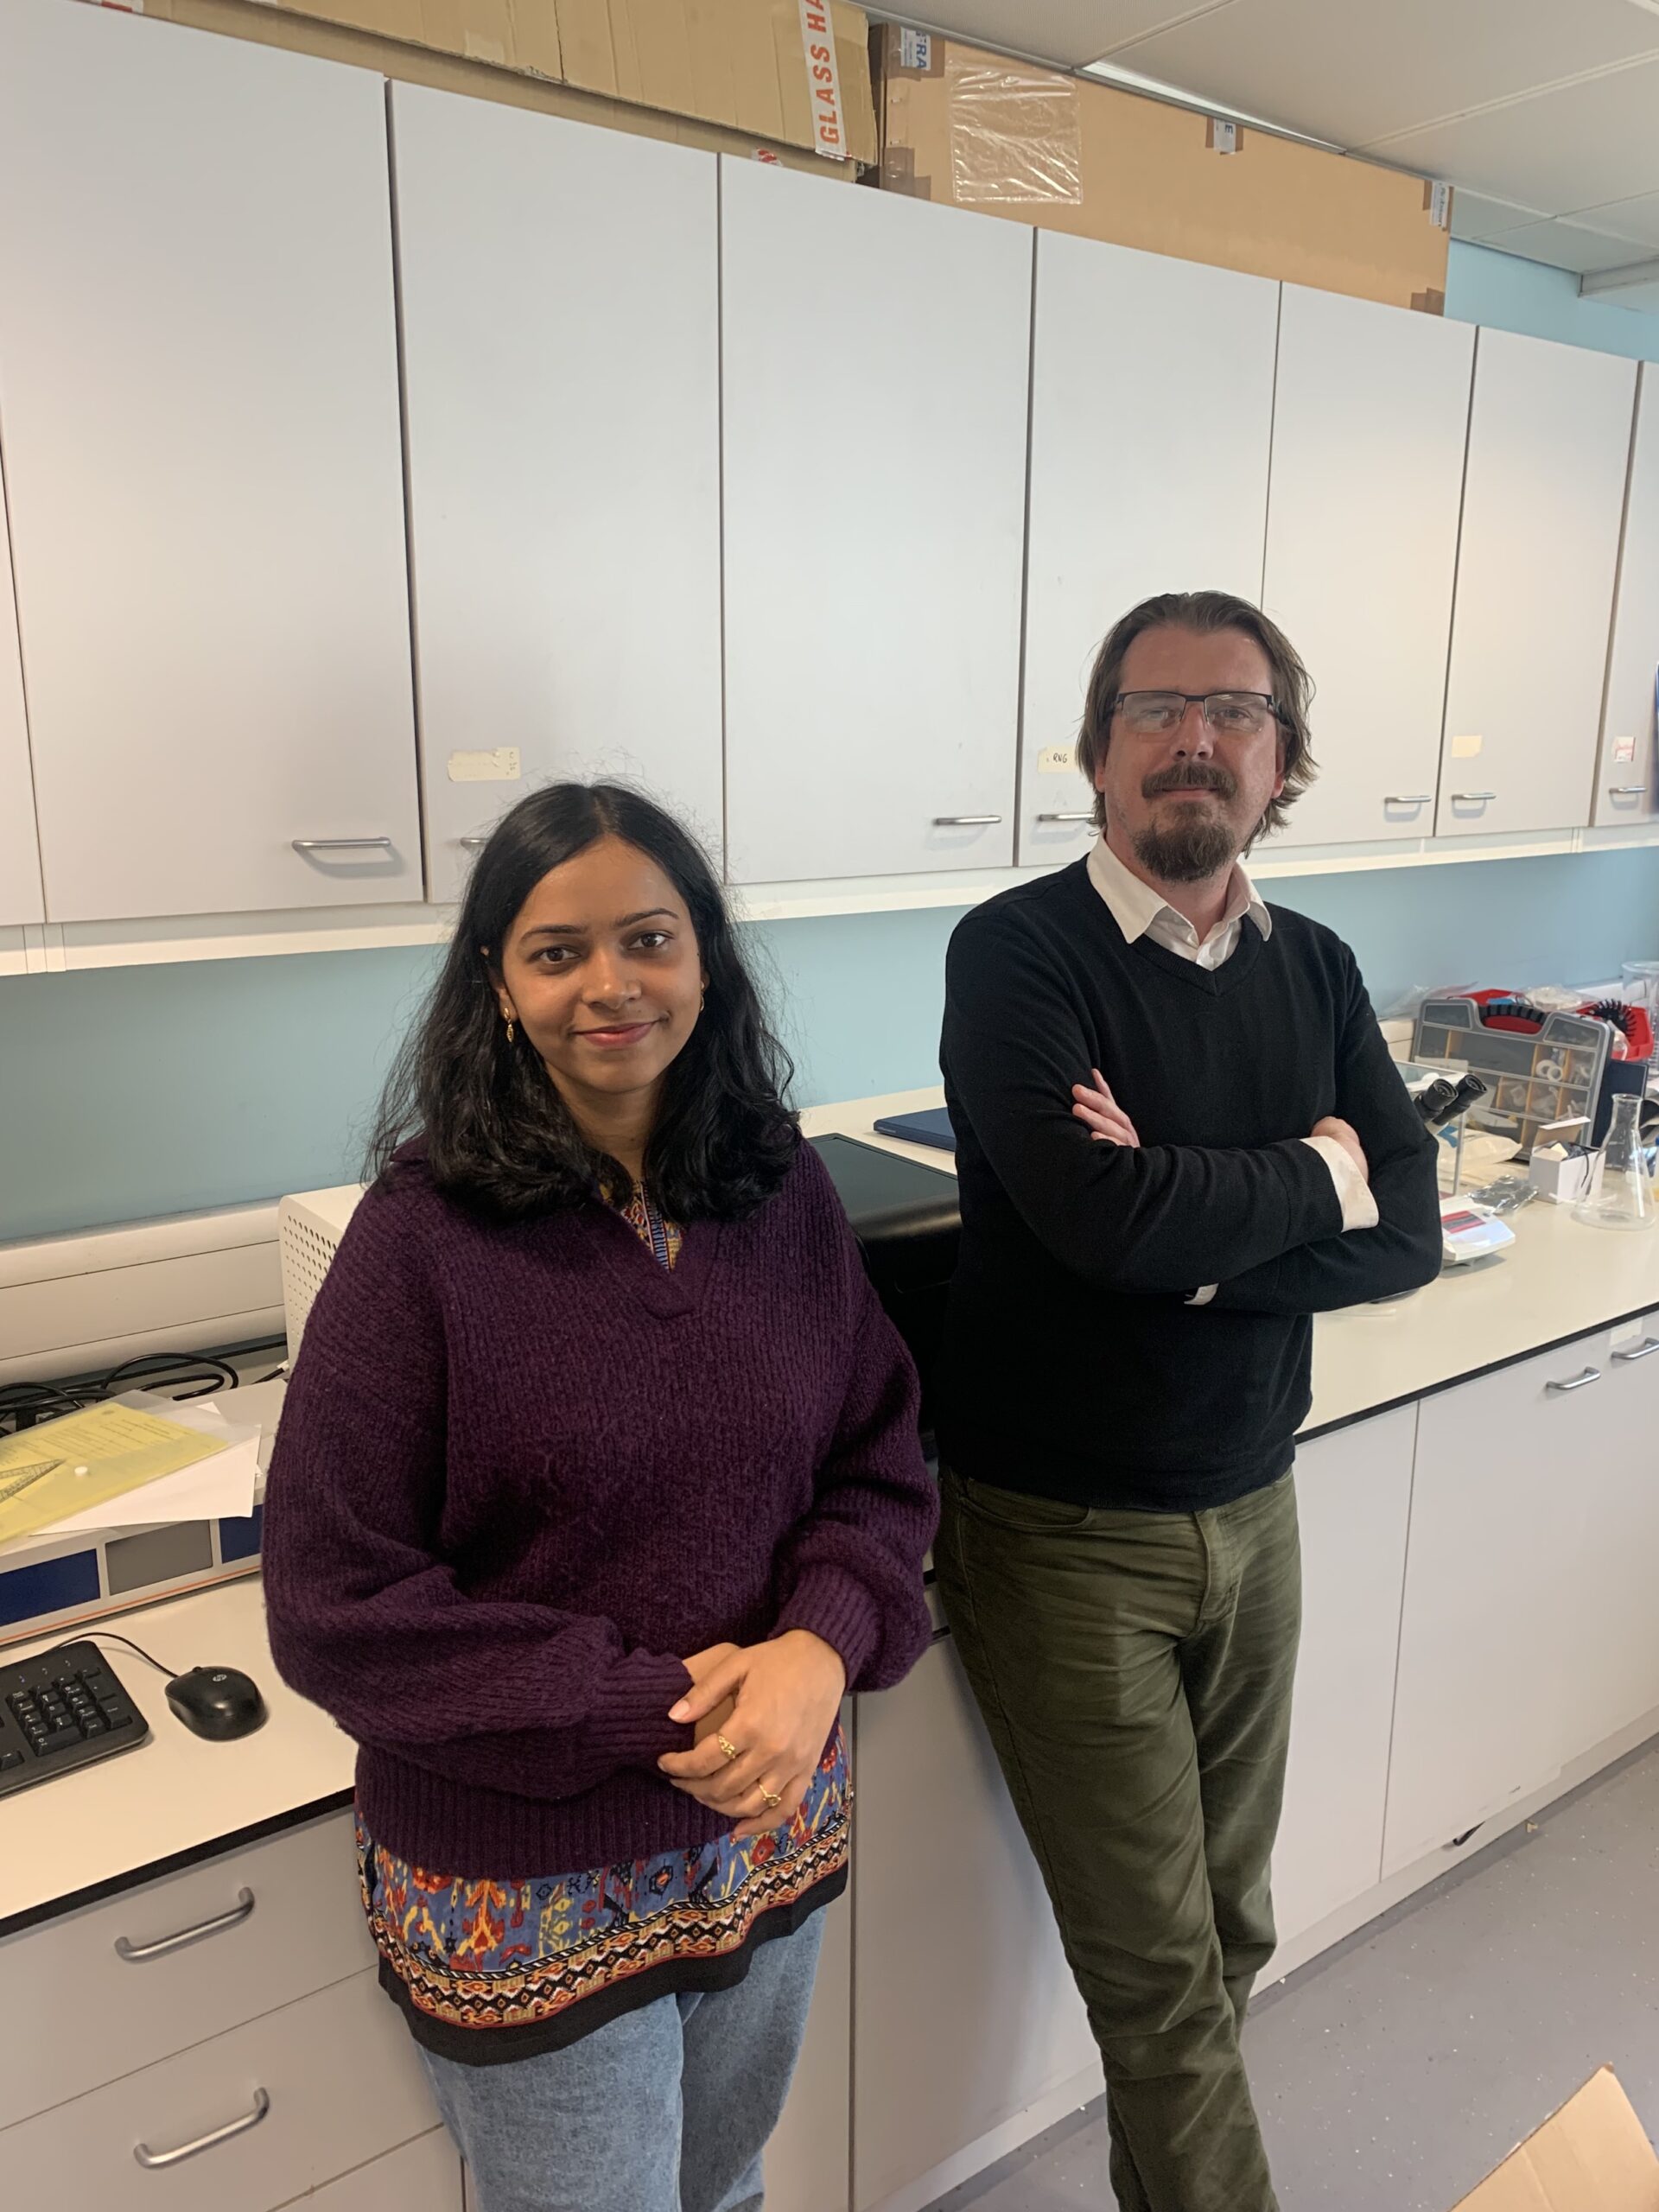 Sagarika (left) and Ross (right) they are stood in a lab in front of a workbench.